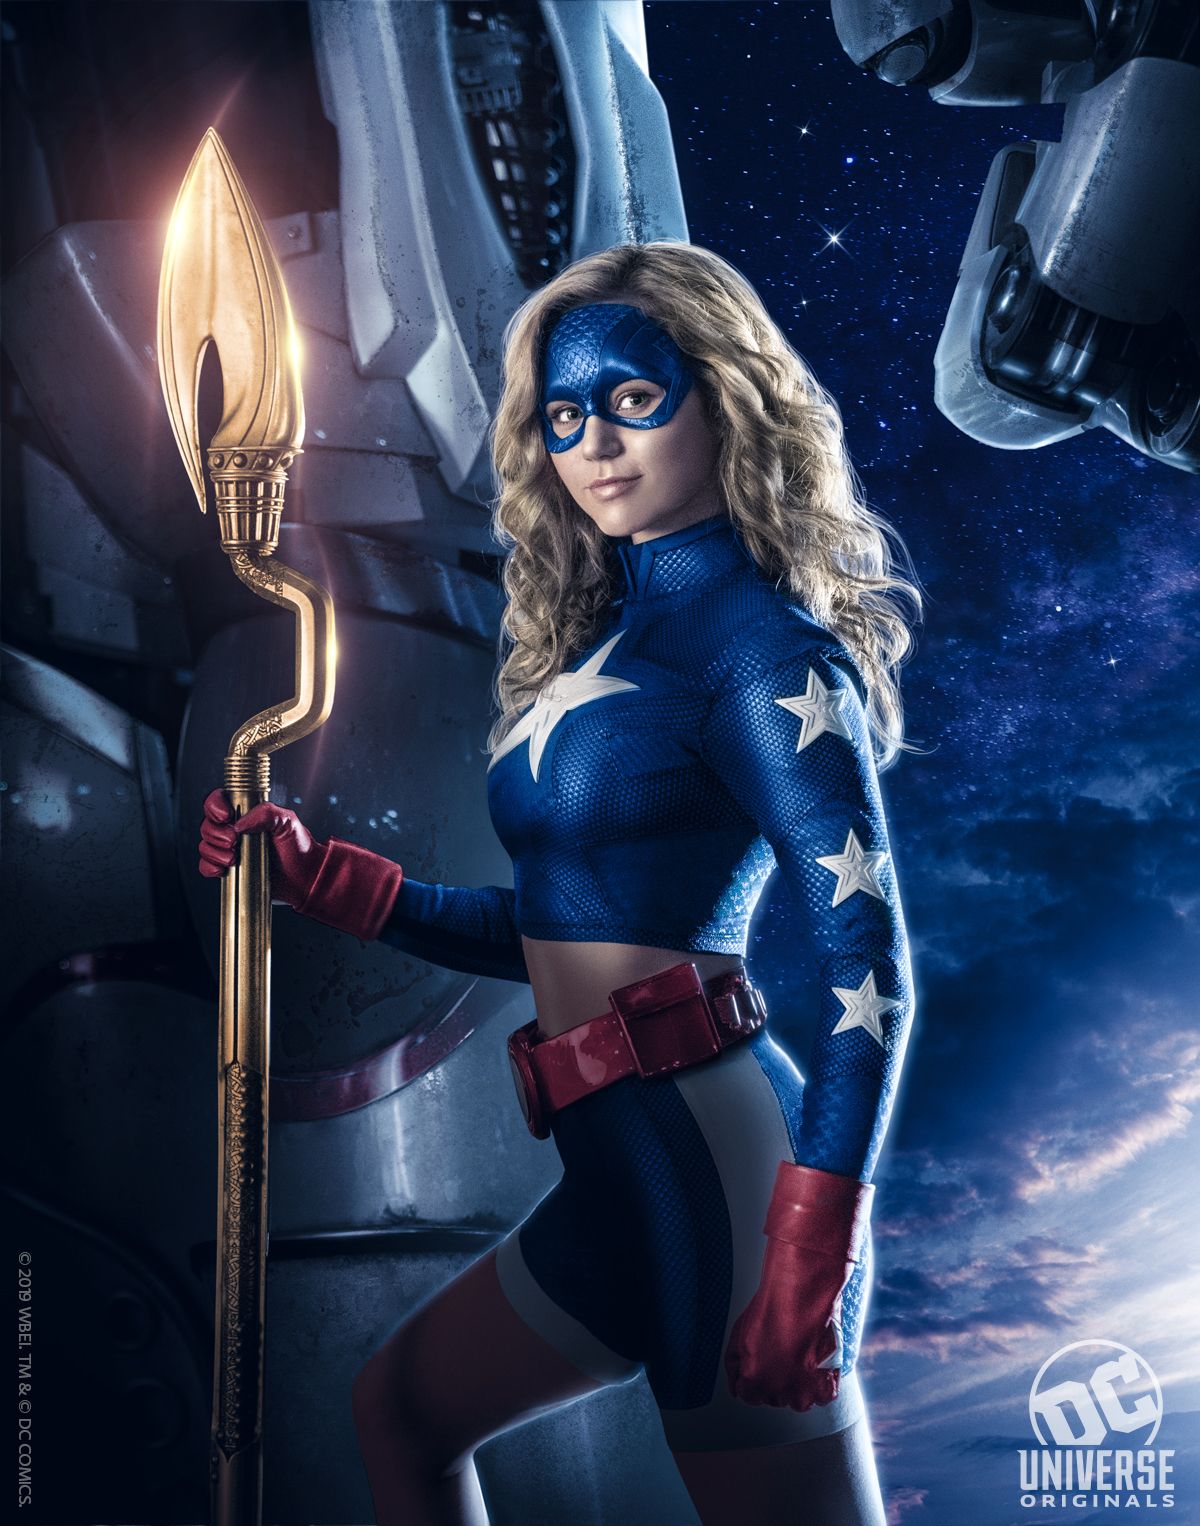 DC Universe Shares First Look at STARGIRL and Release Schedule